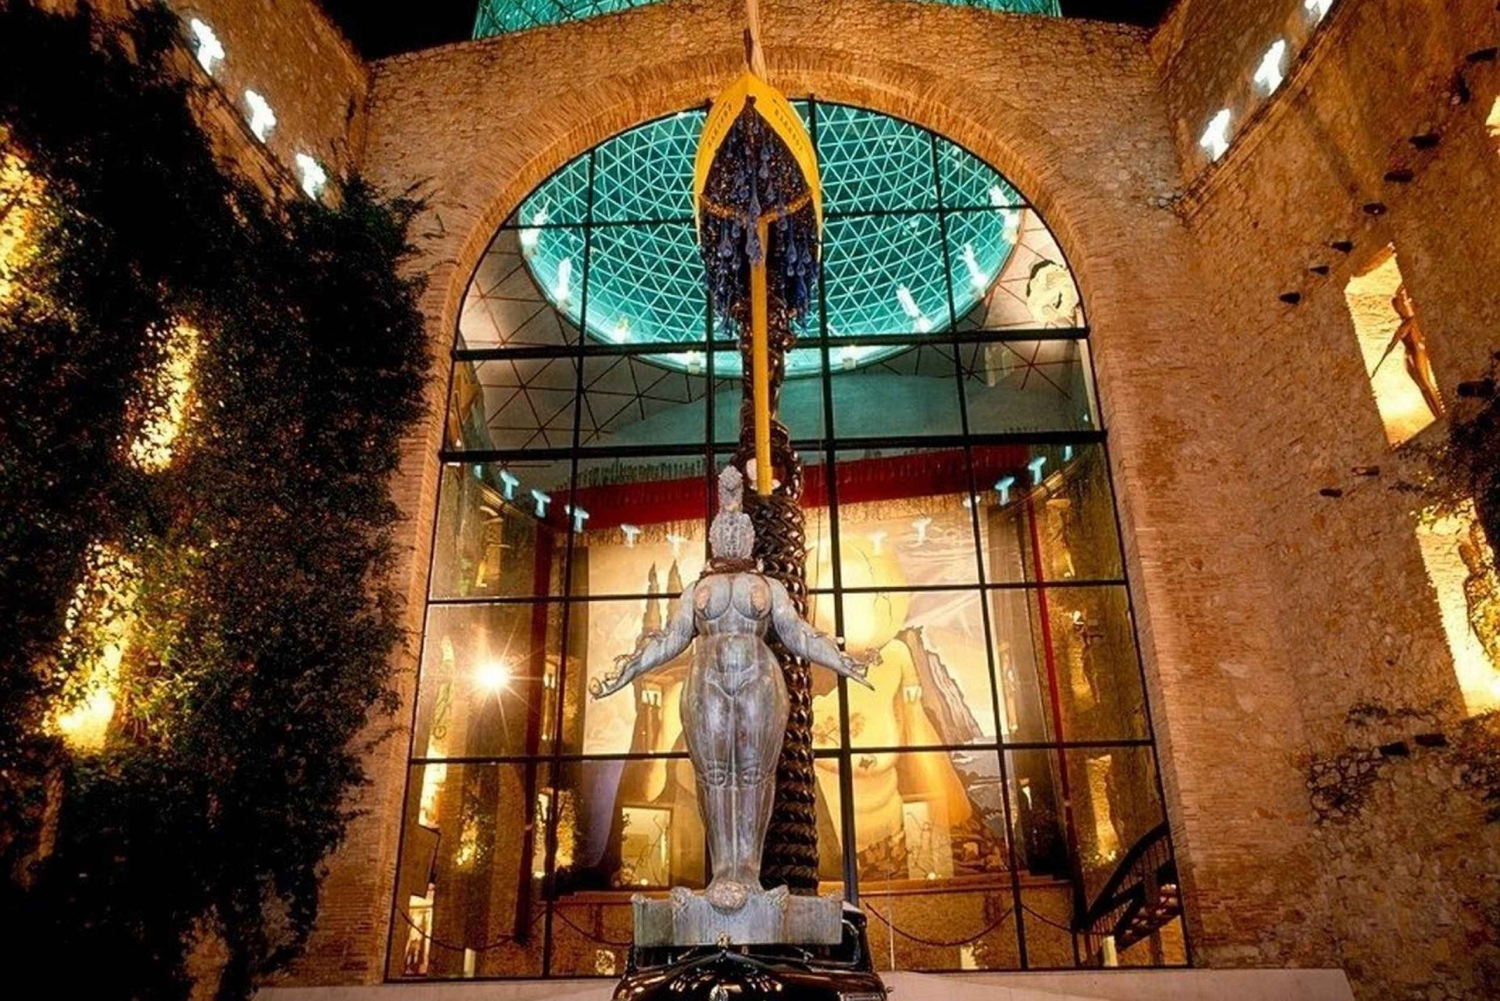 Barcelona: Day Trip to the Dalí Theatre-Museum in Figueres